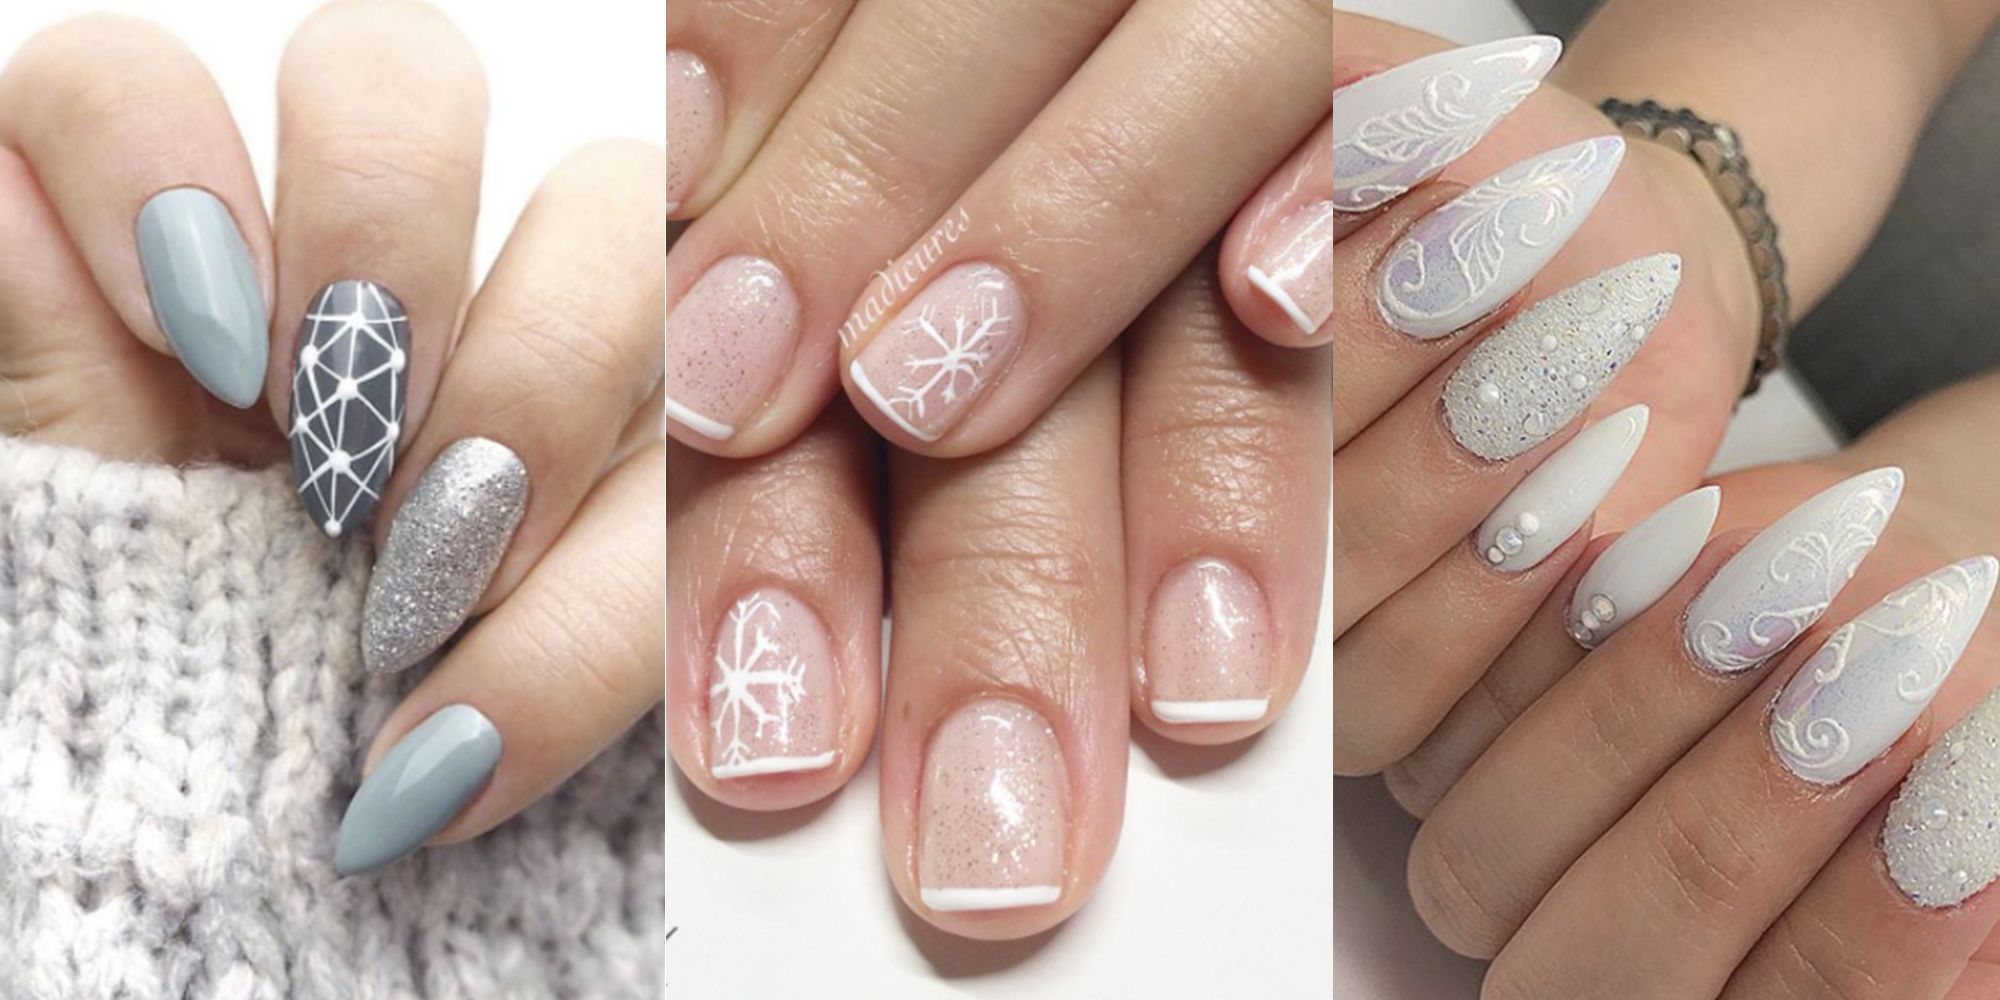 SPECIAL NAILS DESIGNS | Looking for some special nail designs? We've got  you covered! | By MetDaan Nails | Facebook